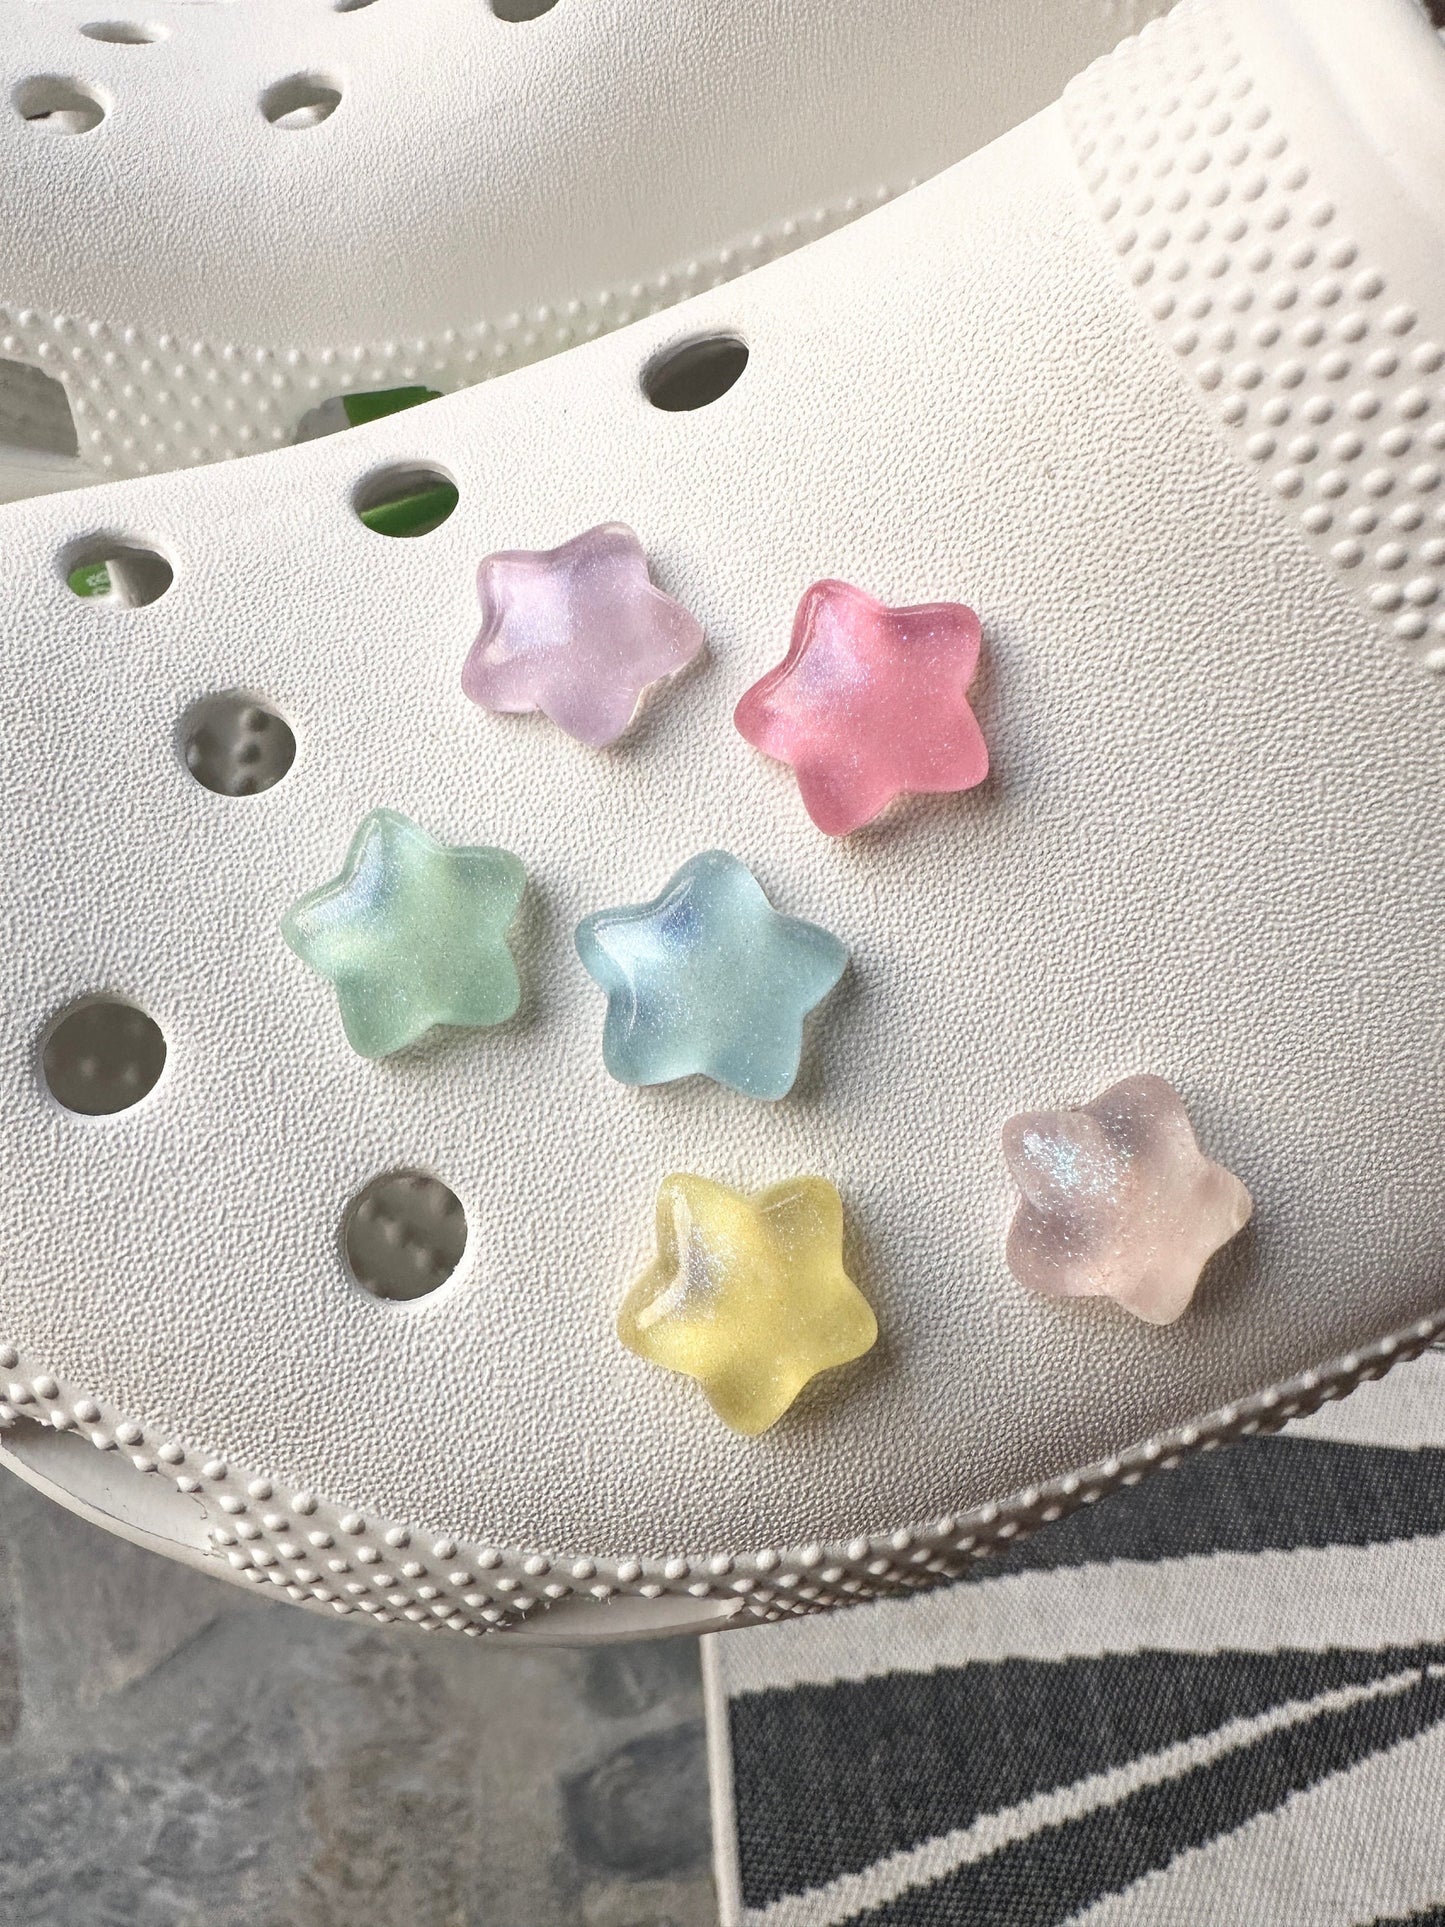 Jelly star Shoe charms | Chibi star | Shoe charms | kawaii aesthetic | gummy stars | gummy shoe charms | rubber clog charms | puffy stars